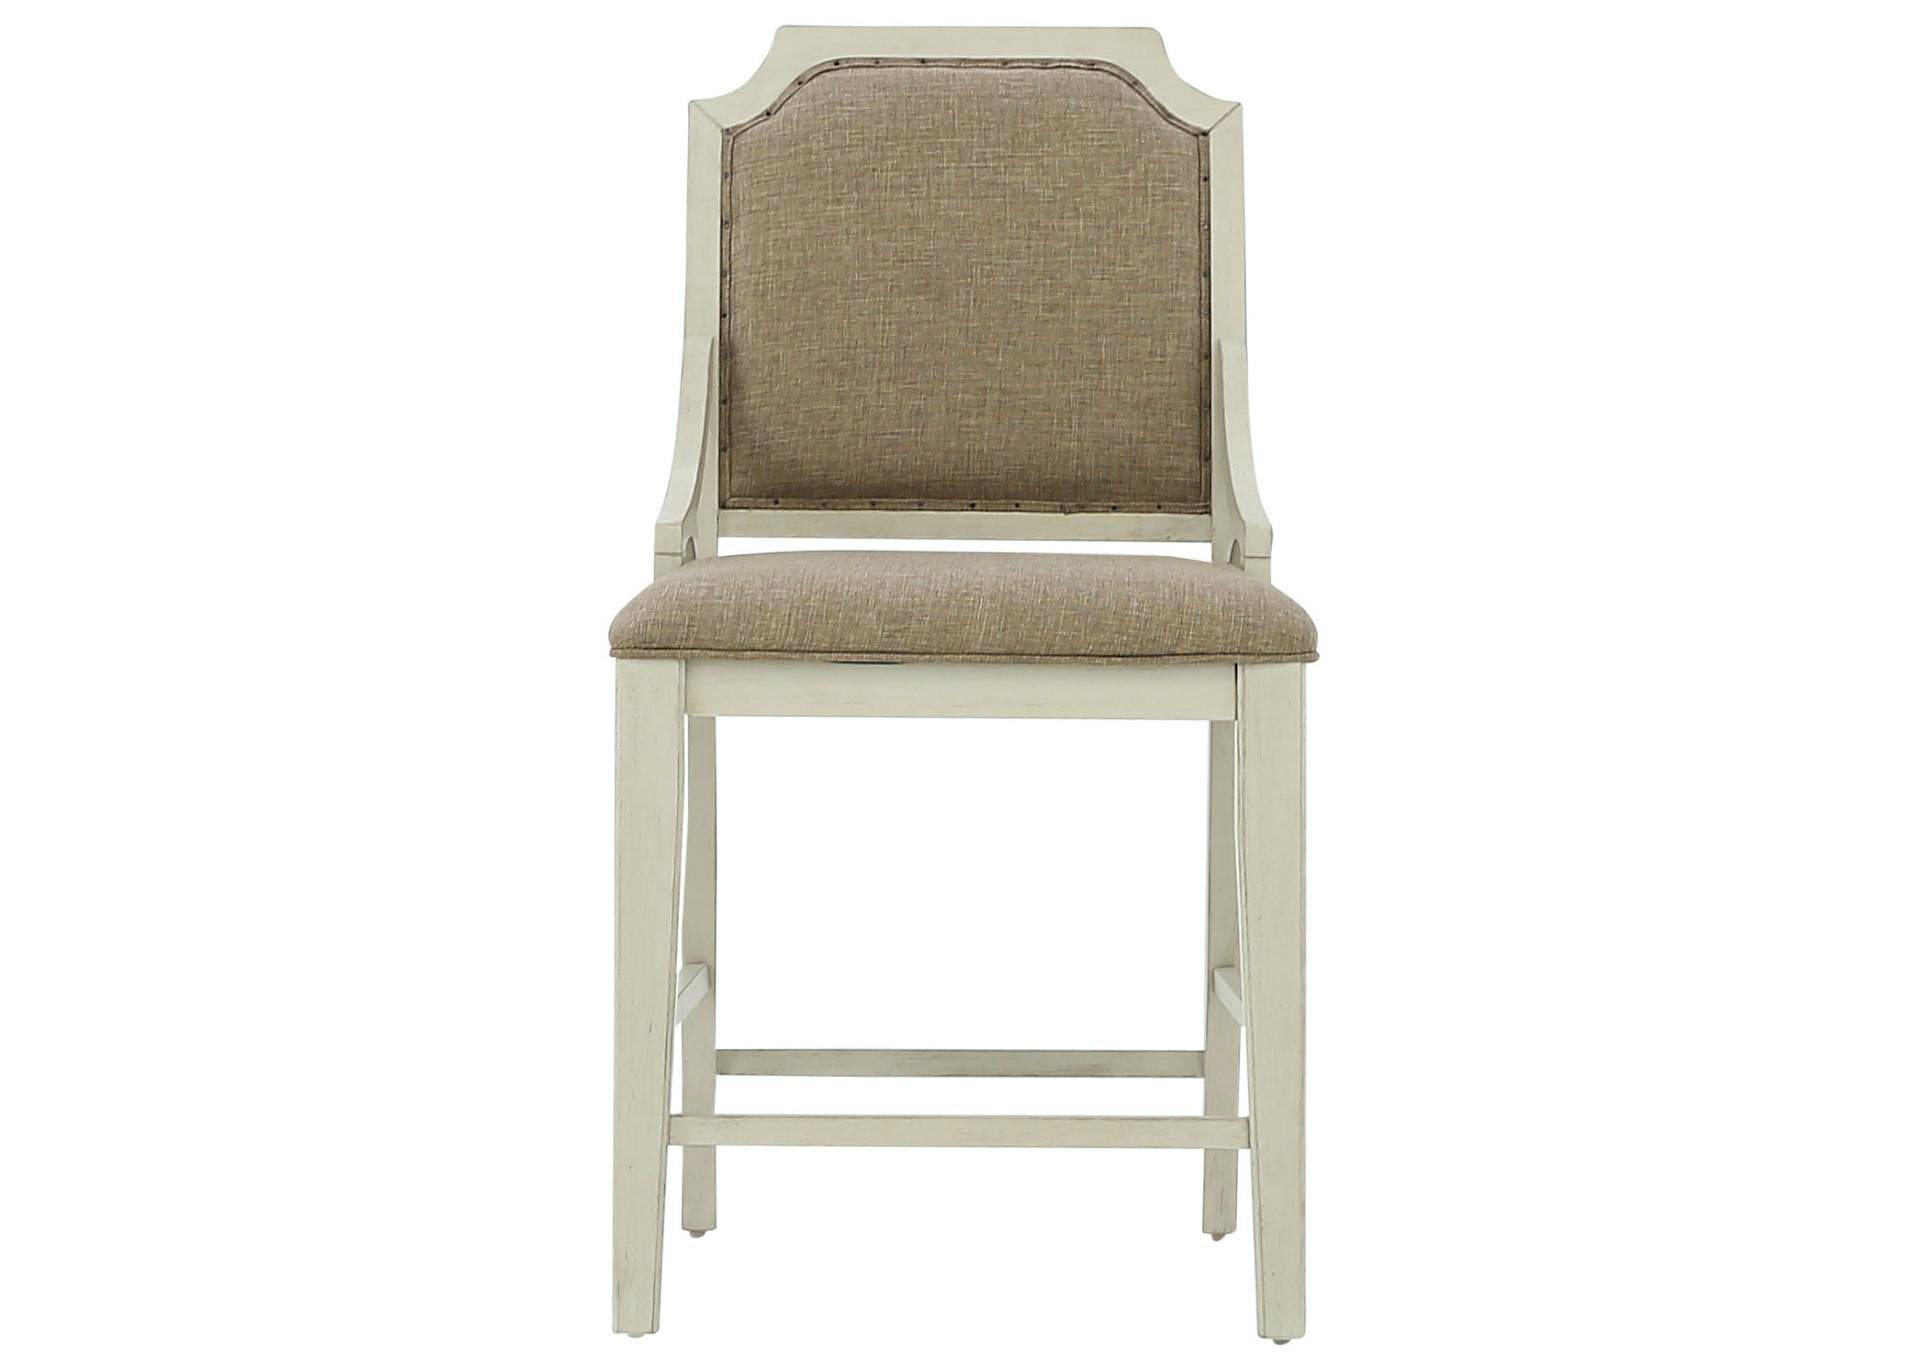 MYSTIC CAY GATHERING CHAIR,AVALON FURNITURE